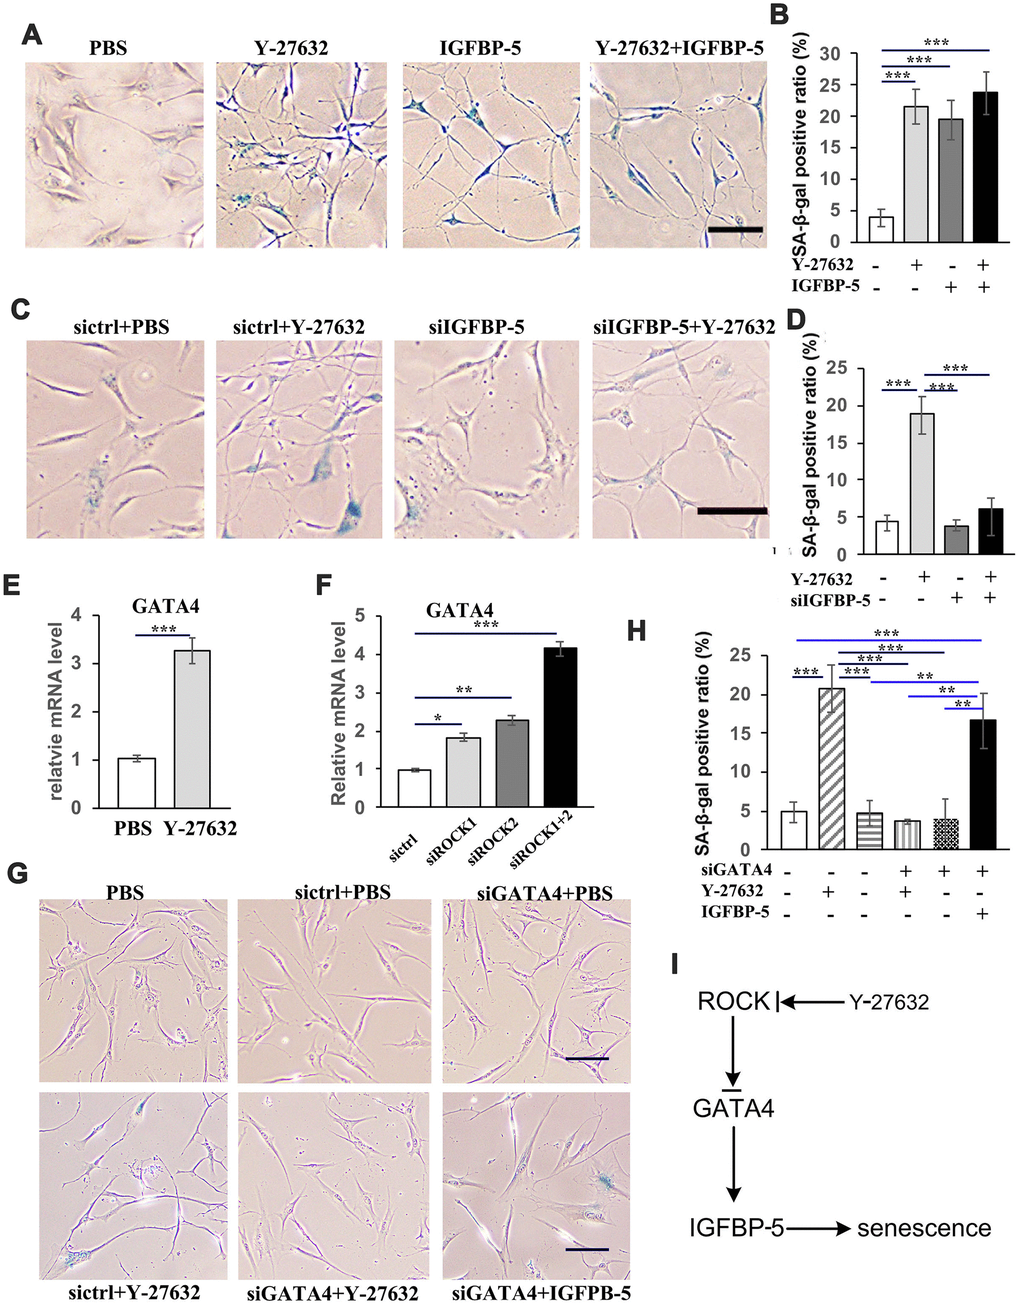 Y-27632 promotes the senescence of HDFs through regulation of GATA4/IGFBP-5. (A) HDFs were treated with or without 10 μM Y-27632 or with or without 100 ng/ml IGFBP-5 for 48 h, then were fixed and analyzed using a SA-β-gal staining kit to detect senescent cells. scale bar = 100 μm. (B) Quantification of SA-β-gal-positive cells in (d), the percentage of SA-β-gal-positive cells was calculated based on counting a total of 500 cells. (C) HDFs were transfected with a siRNA targeting IGFBP-5 (siIGFBP-5) or a scrambled siRNA (sictrl). After transfection for 24 h, HDFs were treated with PBS or 10 μM Y-27632 for 48 h and were then fixed and analyzed using a SA-β-gal staining kit to detect senescent cells. scale bar = 100 μm. (D) Quantification of SA-β-gal-positive cells in (C), the percentage of SA-β-gal-positive cells was calculated based on counting a total of 500 cells. (E) HDFs were cultured in growth medium in the presence of PBS or 10 μM Y-27632, then collected at 48 h after treatment for RT-qPCR analysis of GATA4. The fold change of GATA4 in Y-27632 treated HDFs relative to the control (expression level as 1) is shown. (F) HDFs were transfected with siRNAs for ROCK1 and/or ROCK2, or a scrambled siRNA as a control, and at 48 h after transfection, the mRNA expression level of GATA4 was detected by RT-qPCR analysis. The fold change of GATA4 in the ROCK knockdown HDFs relative to the control (expression level as 1) is shown. (G) HDFs were transfected with a scrambled siRNA (sictrl), siRNAs targeting GATA4 (siGATA4), together with either PBS or 10 μM Y-27632 or 100 ng/ml IGFBP-5 and 10 μM Y-27632 alone for 48 h, then were fixed and analyzed using a SA-β-gal staining kit to detect senescent cells, scale bar = 100 μm. (H) Quantification of SA-β-gal-positive cells in (G), the percentage of SA-β-gal-positive cells was calculated based on counting a total of 500 cells. (I) Proposed scheme indicating the mechanism of ROCK regulating the senescence of human skin dermal cells. All experiments were repeated at least 4 times, * P